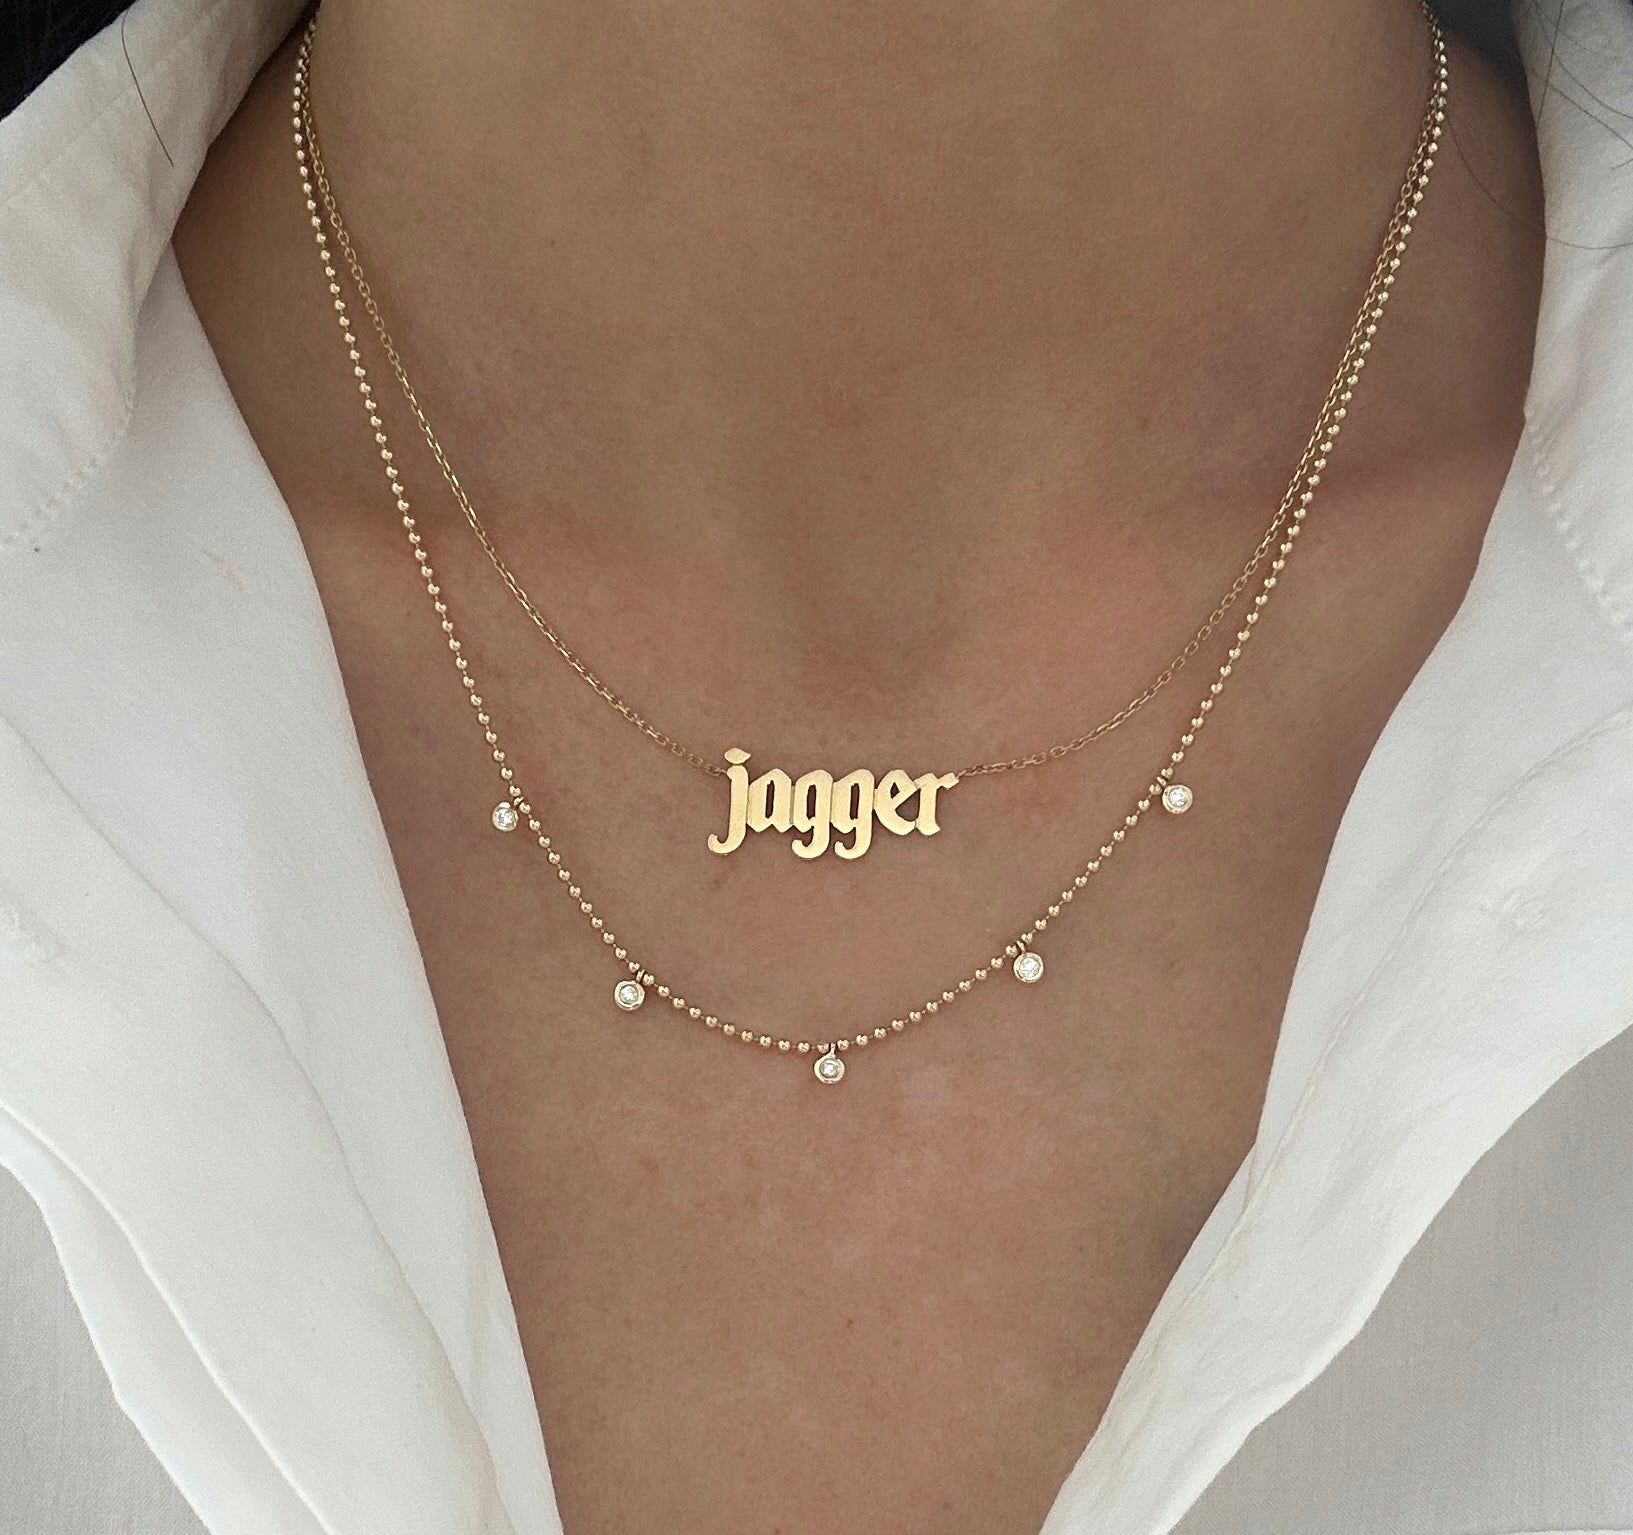 Modern Gothic Name Necklace